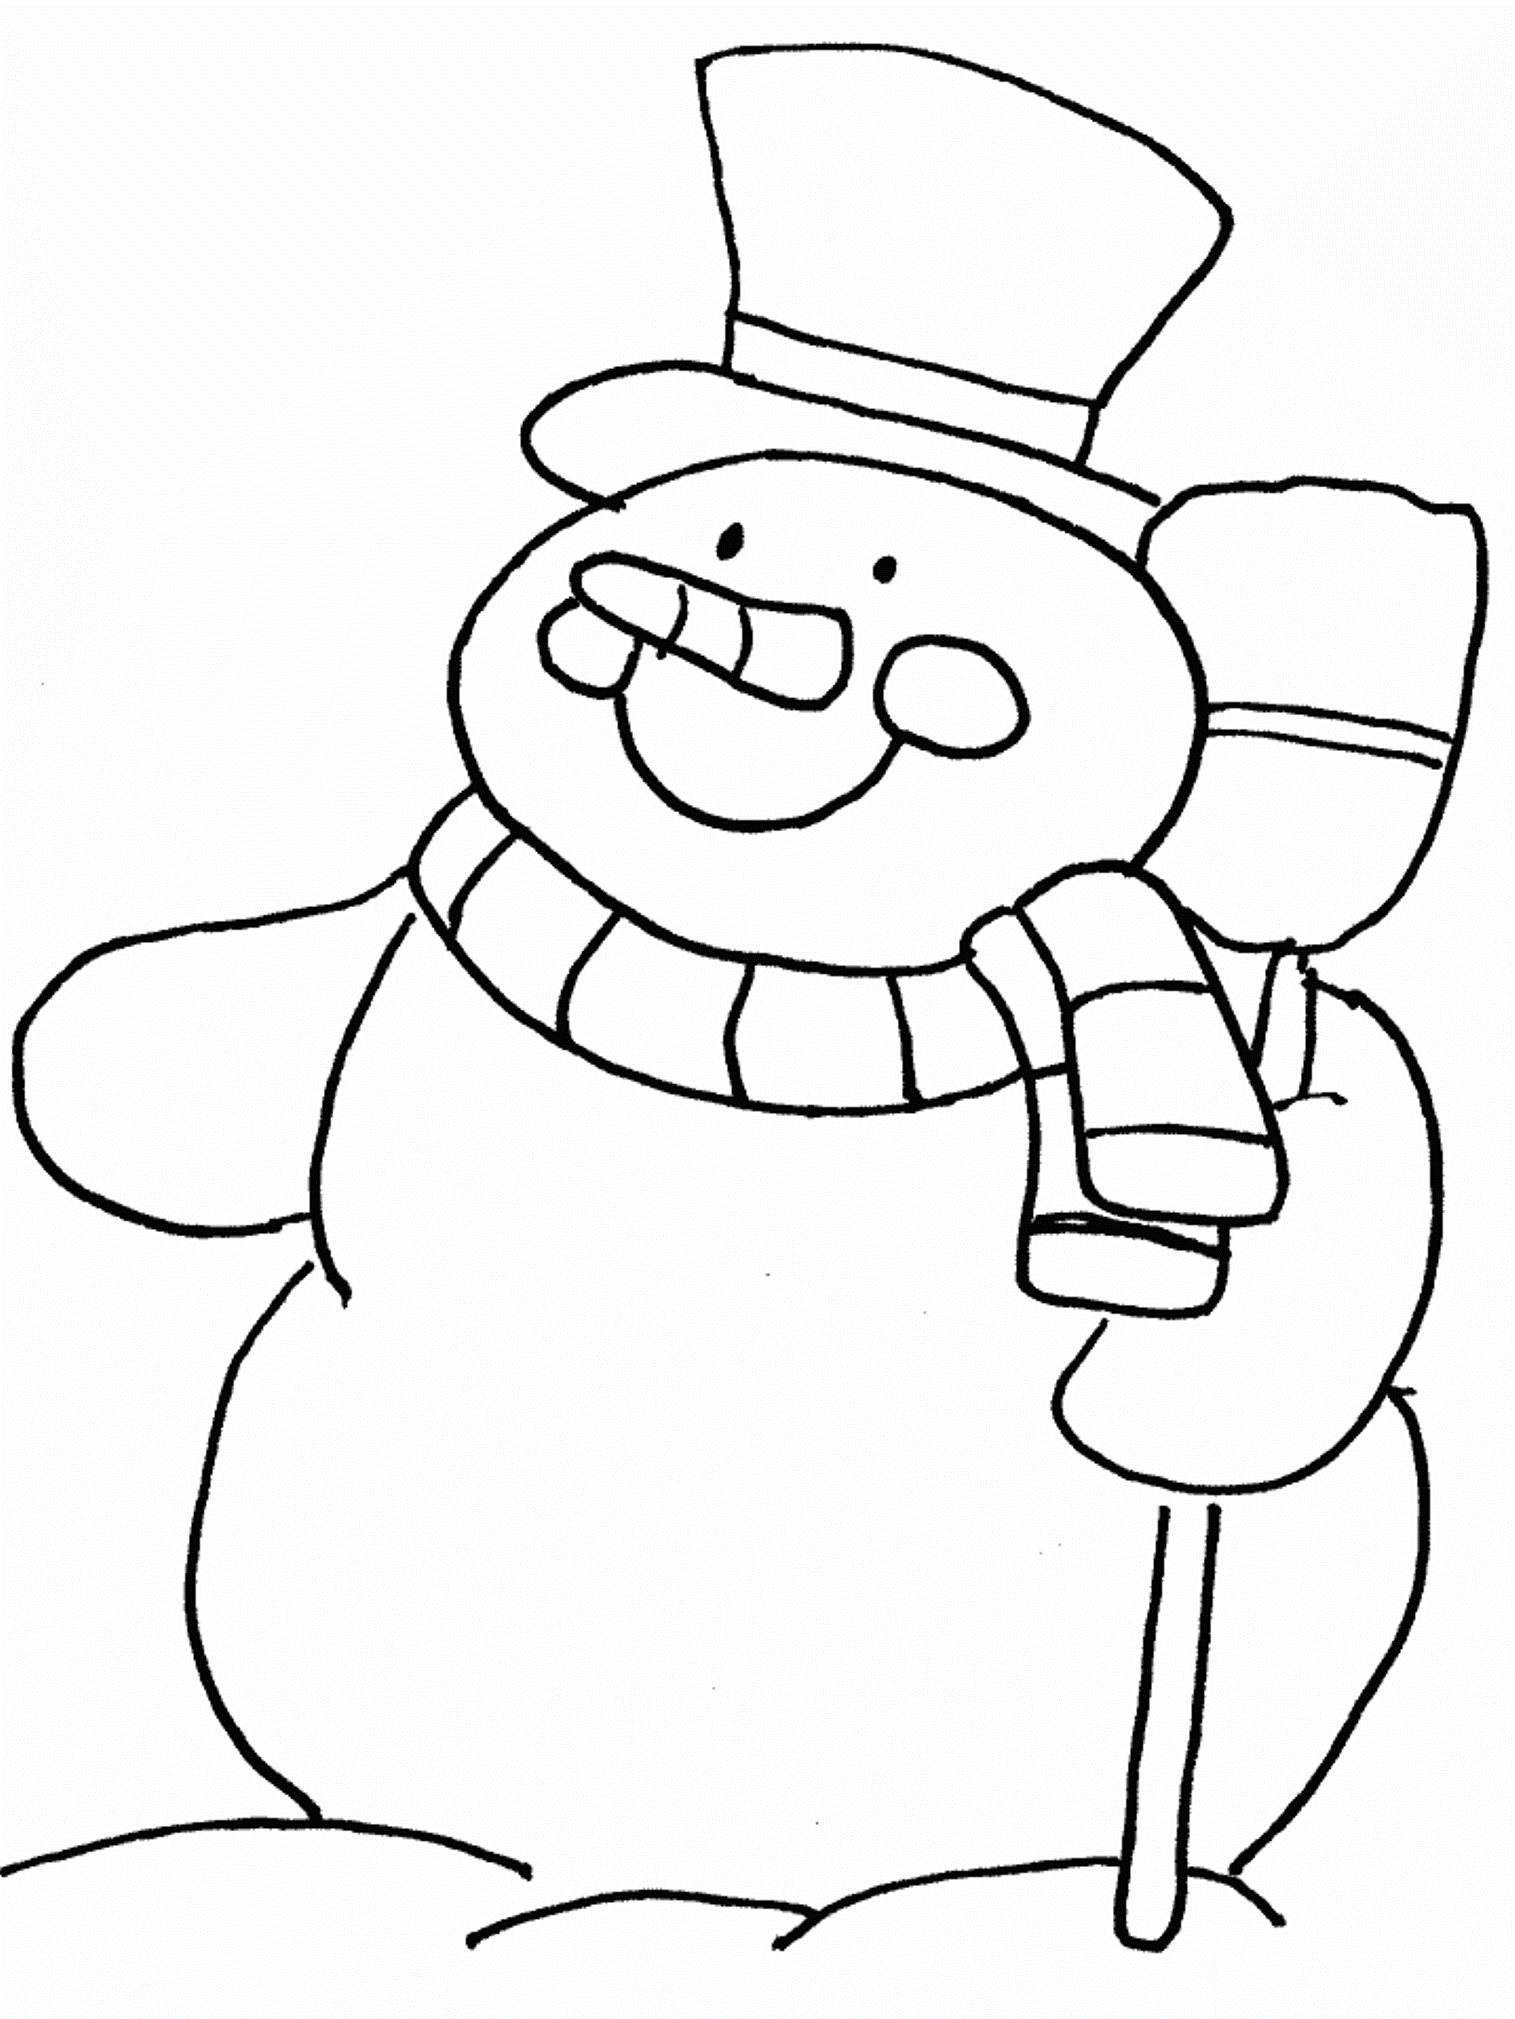 Winter Smiling Snowman Coloring Page